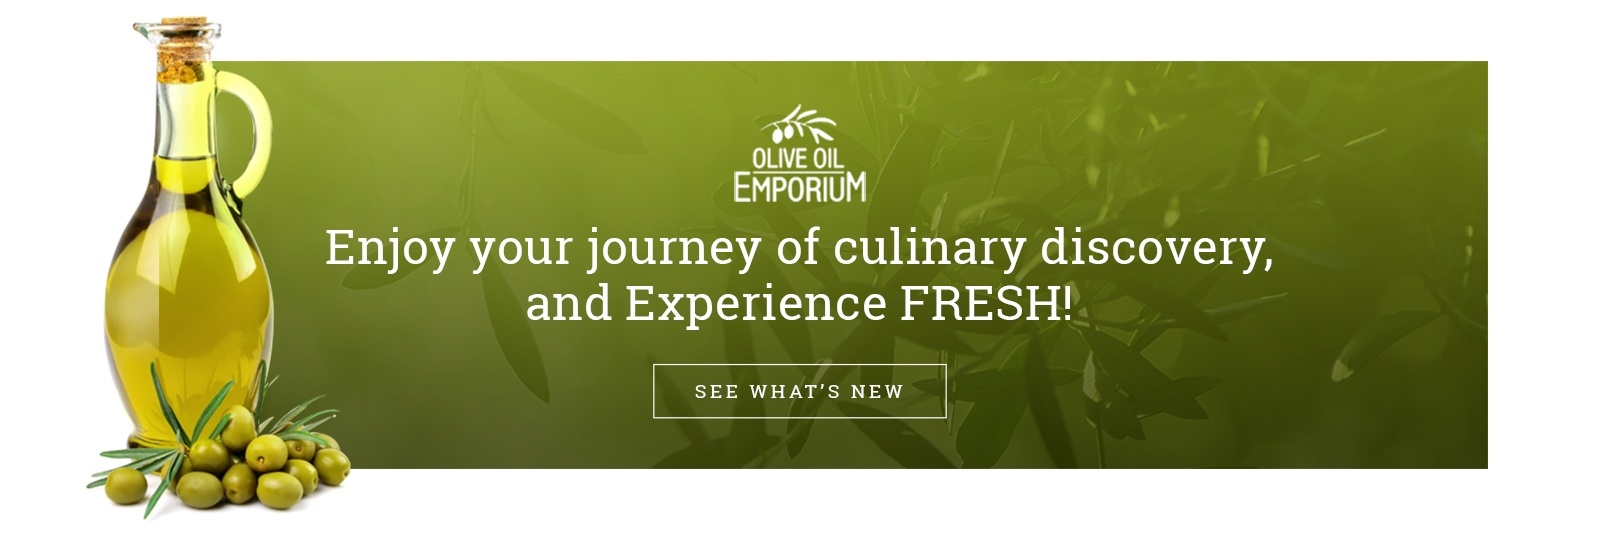 Enjoy your journey of culinary discovery, and experience fresh!